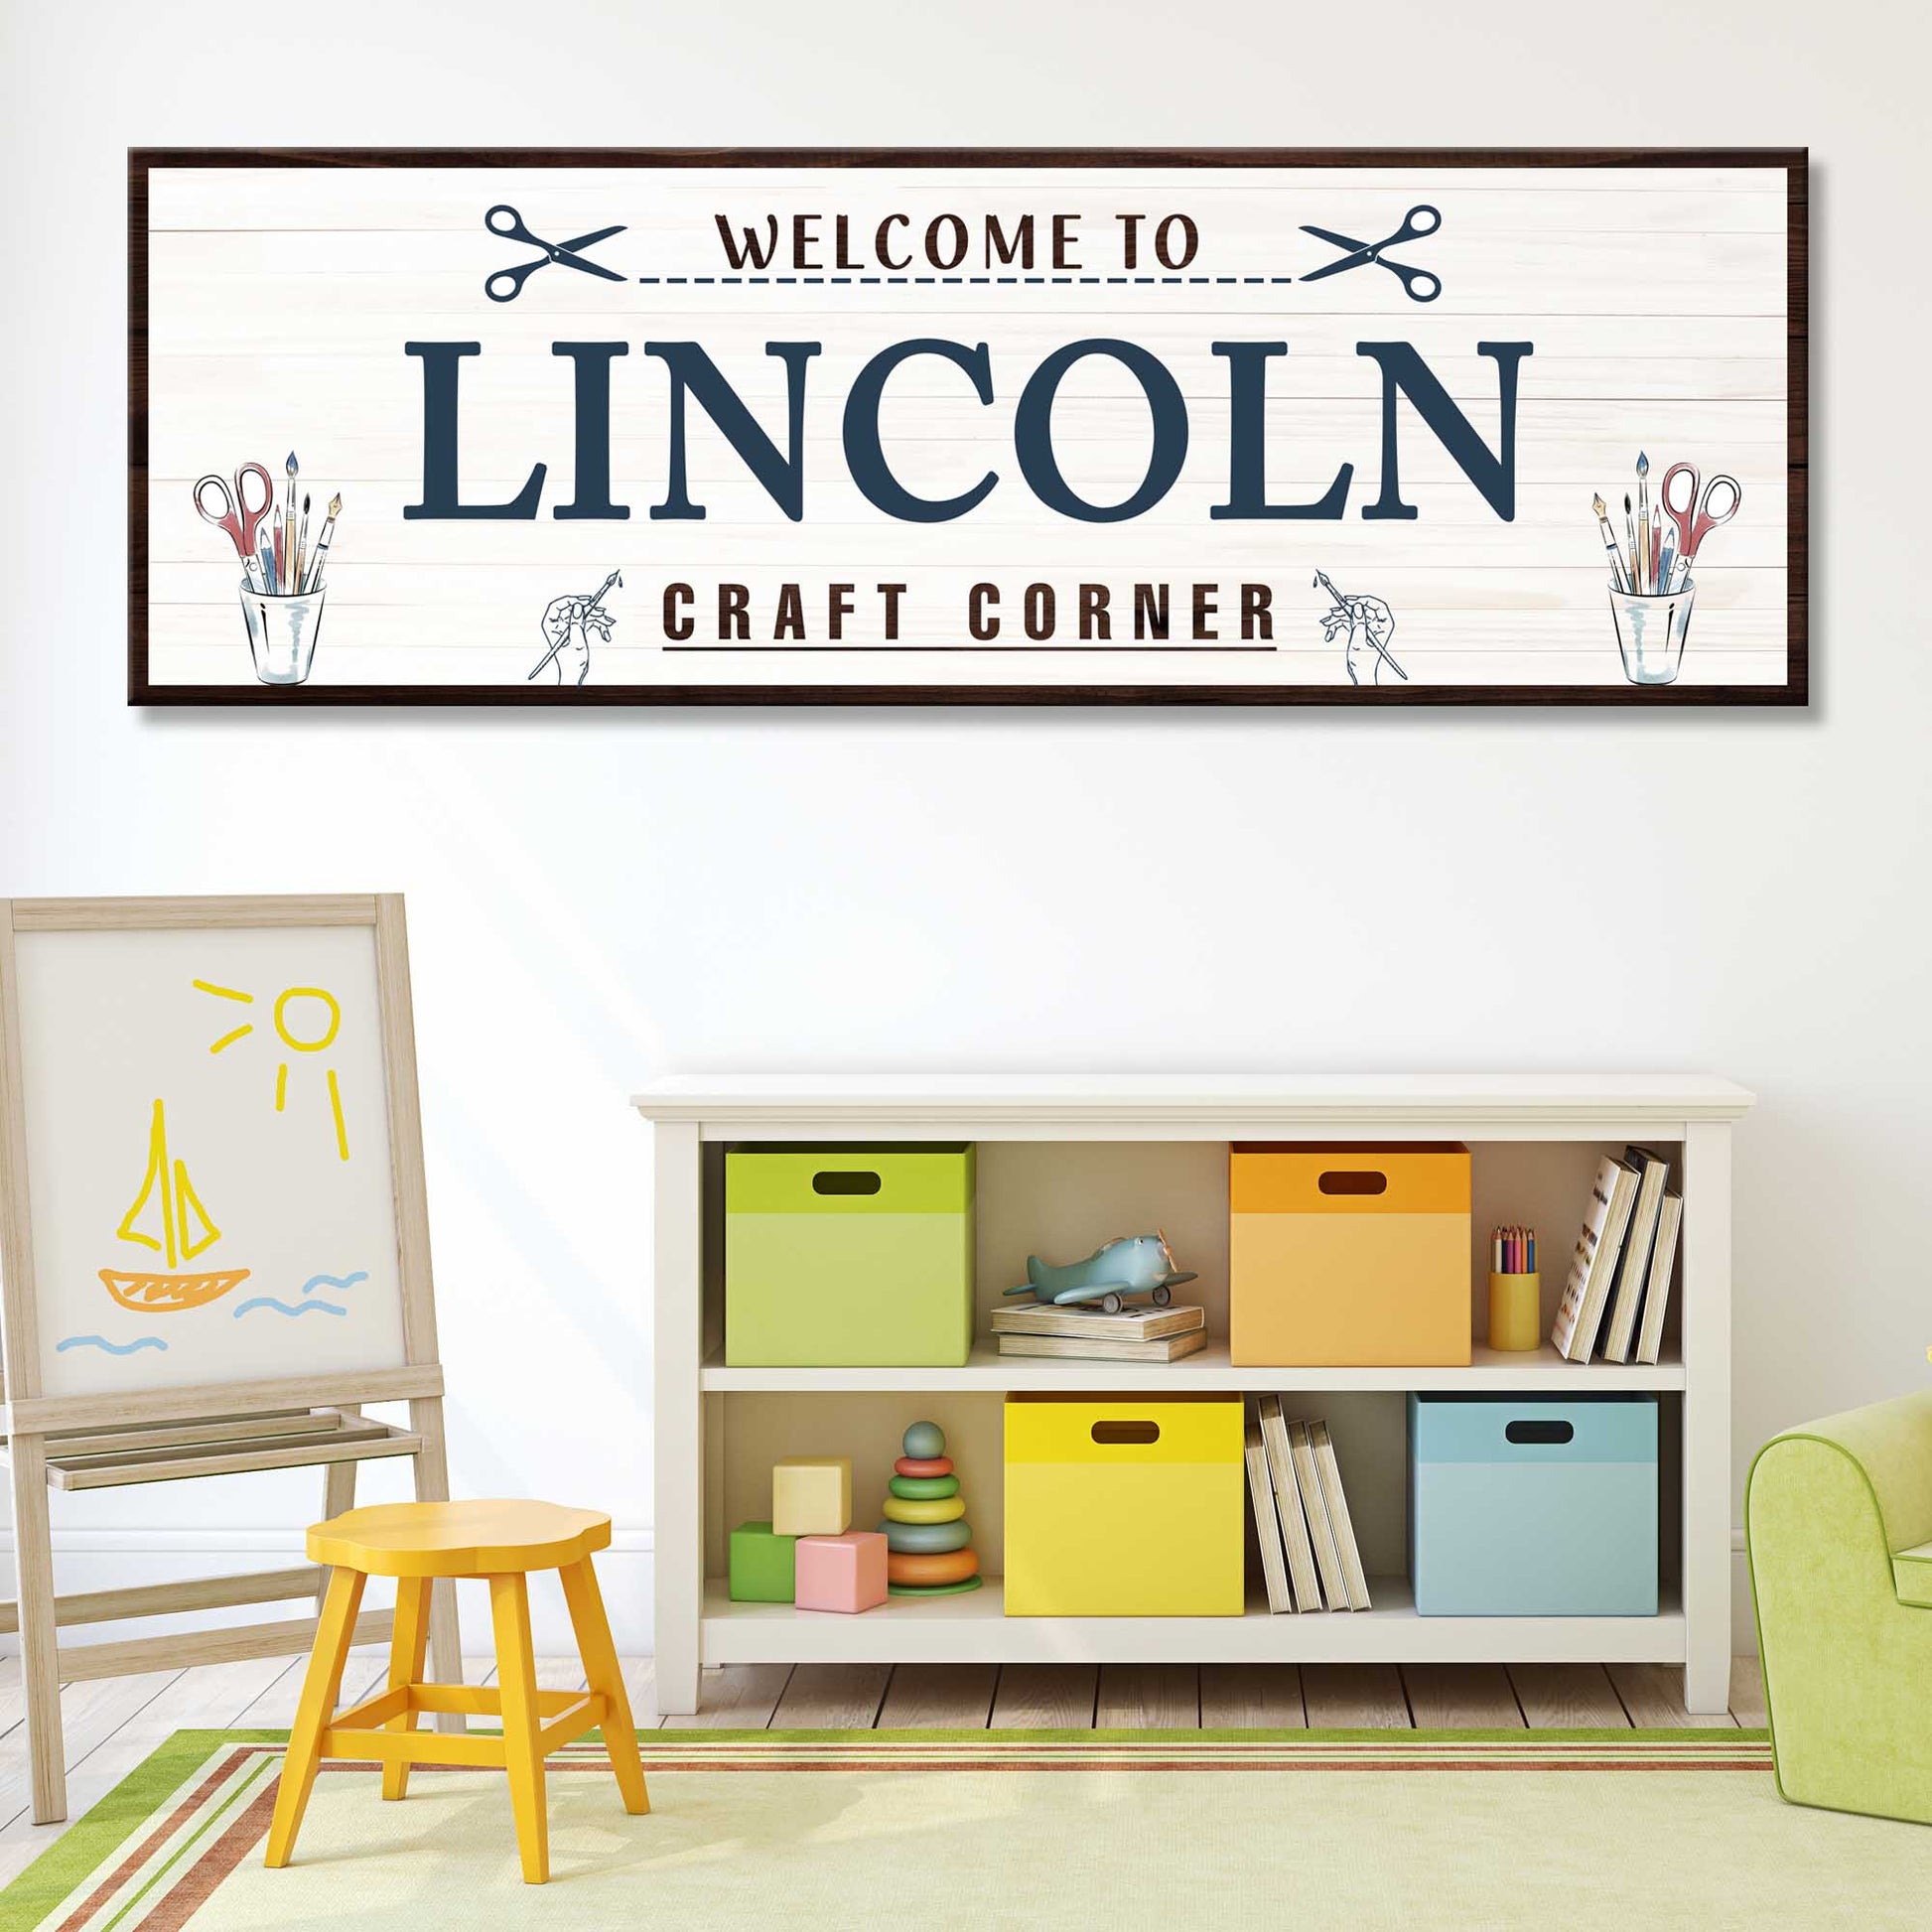 Craft Corner Sign - Image by Tailored Canvases